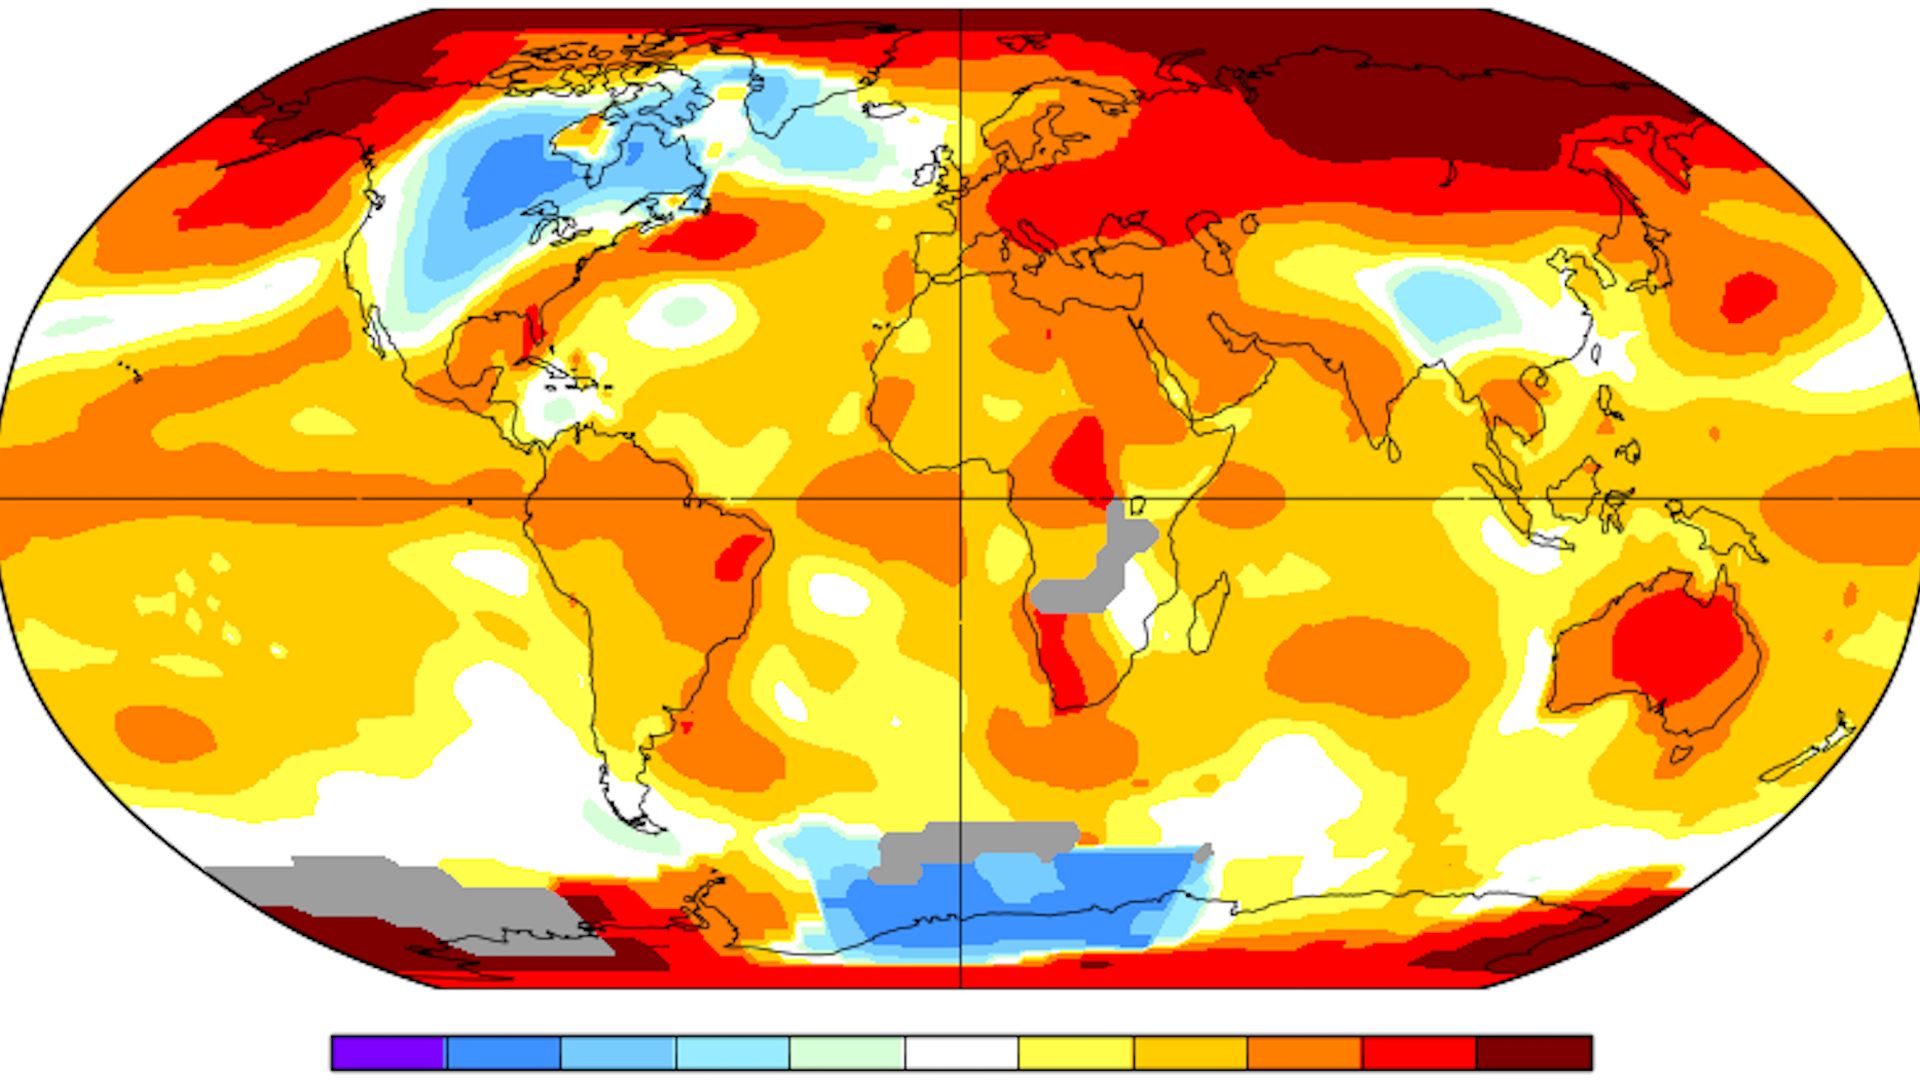 Global average surface temperature anomalies in Oct. 2018 compared to 1951-1980 average.